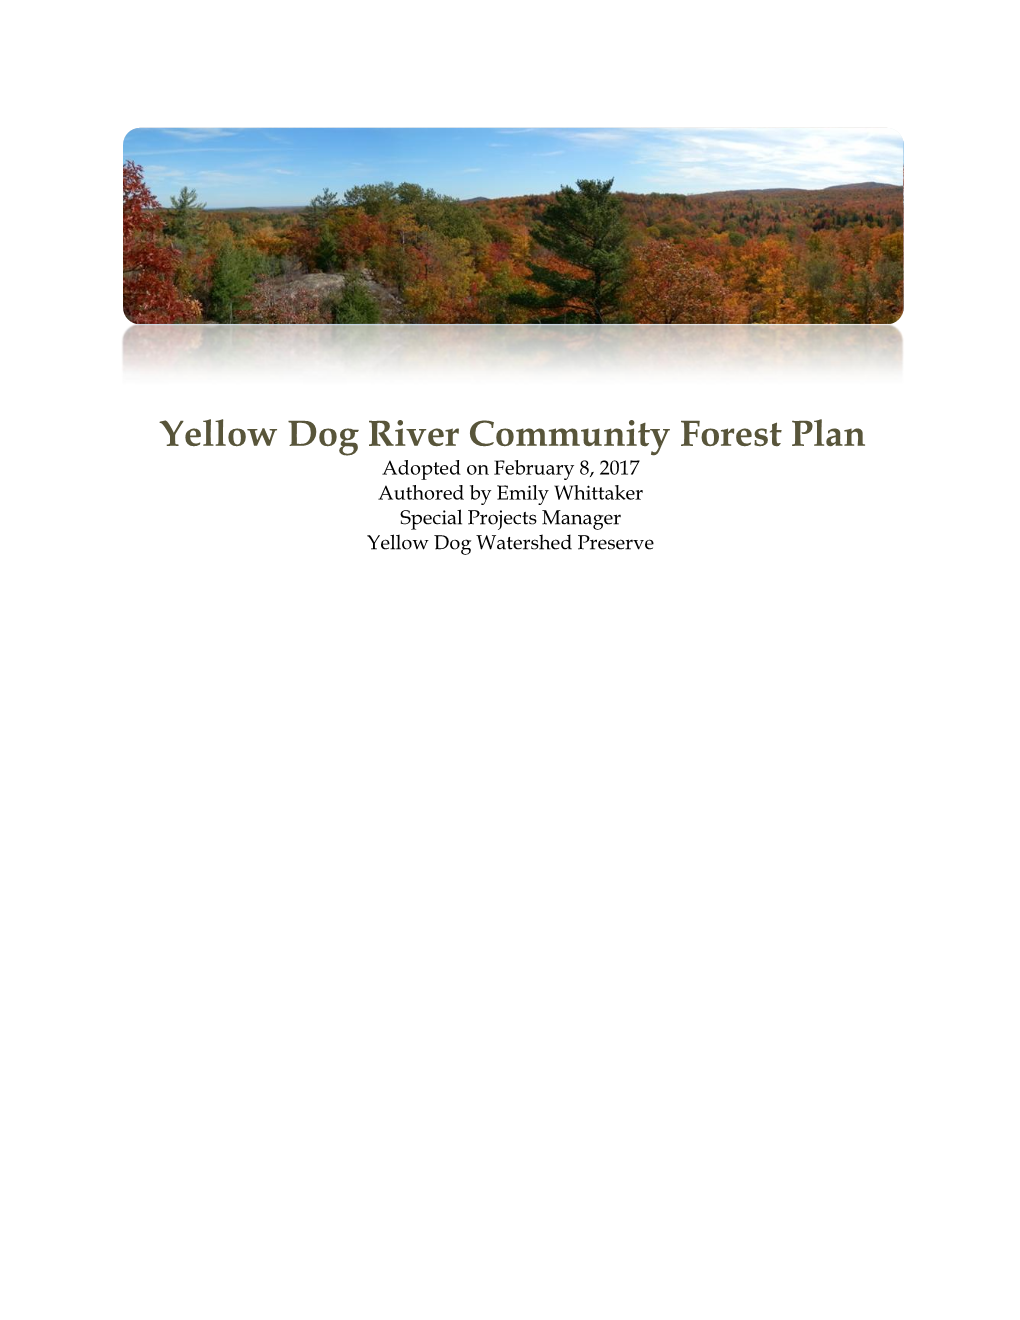 Yellow Dog River Community Forest Plan Adopted on February 8, 2017 Authored by Emily Whittaker Special Projects Manager Yellow Dog Watershed Preserve